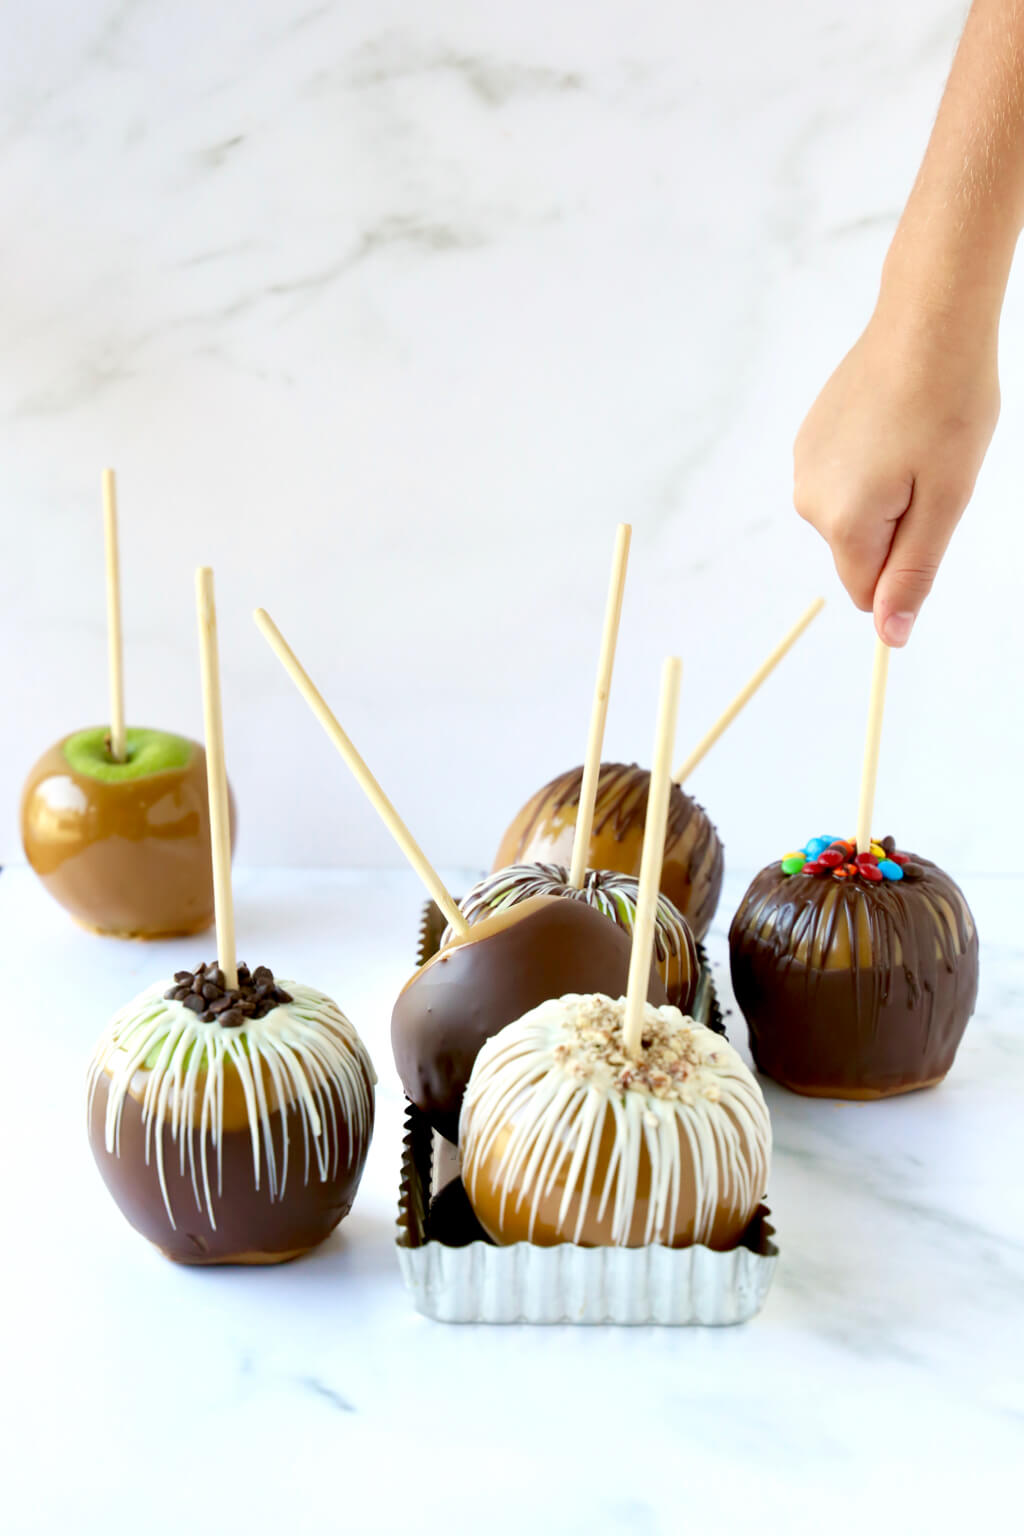 Caramel apples drizzled with chocolate, with a hand reaching in to grab one